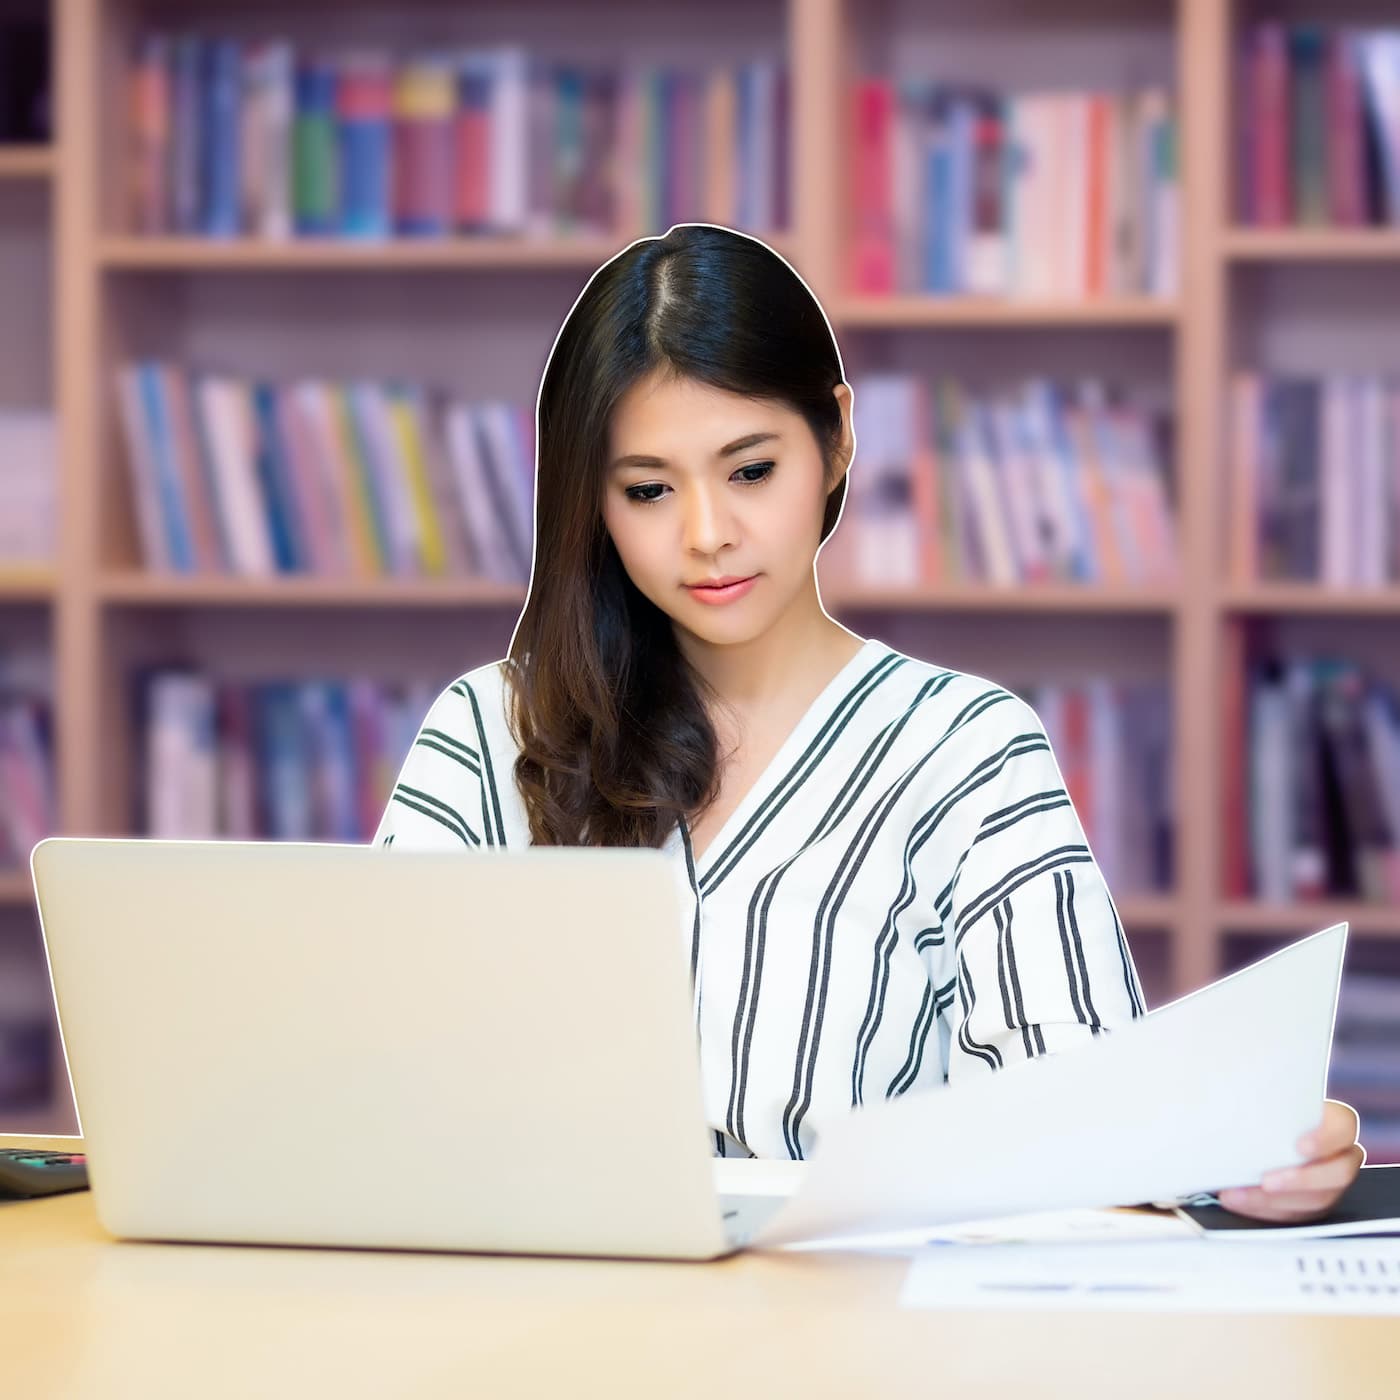 woman studying with laptop in library